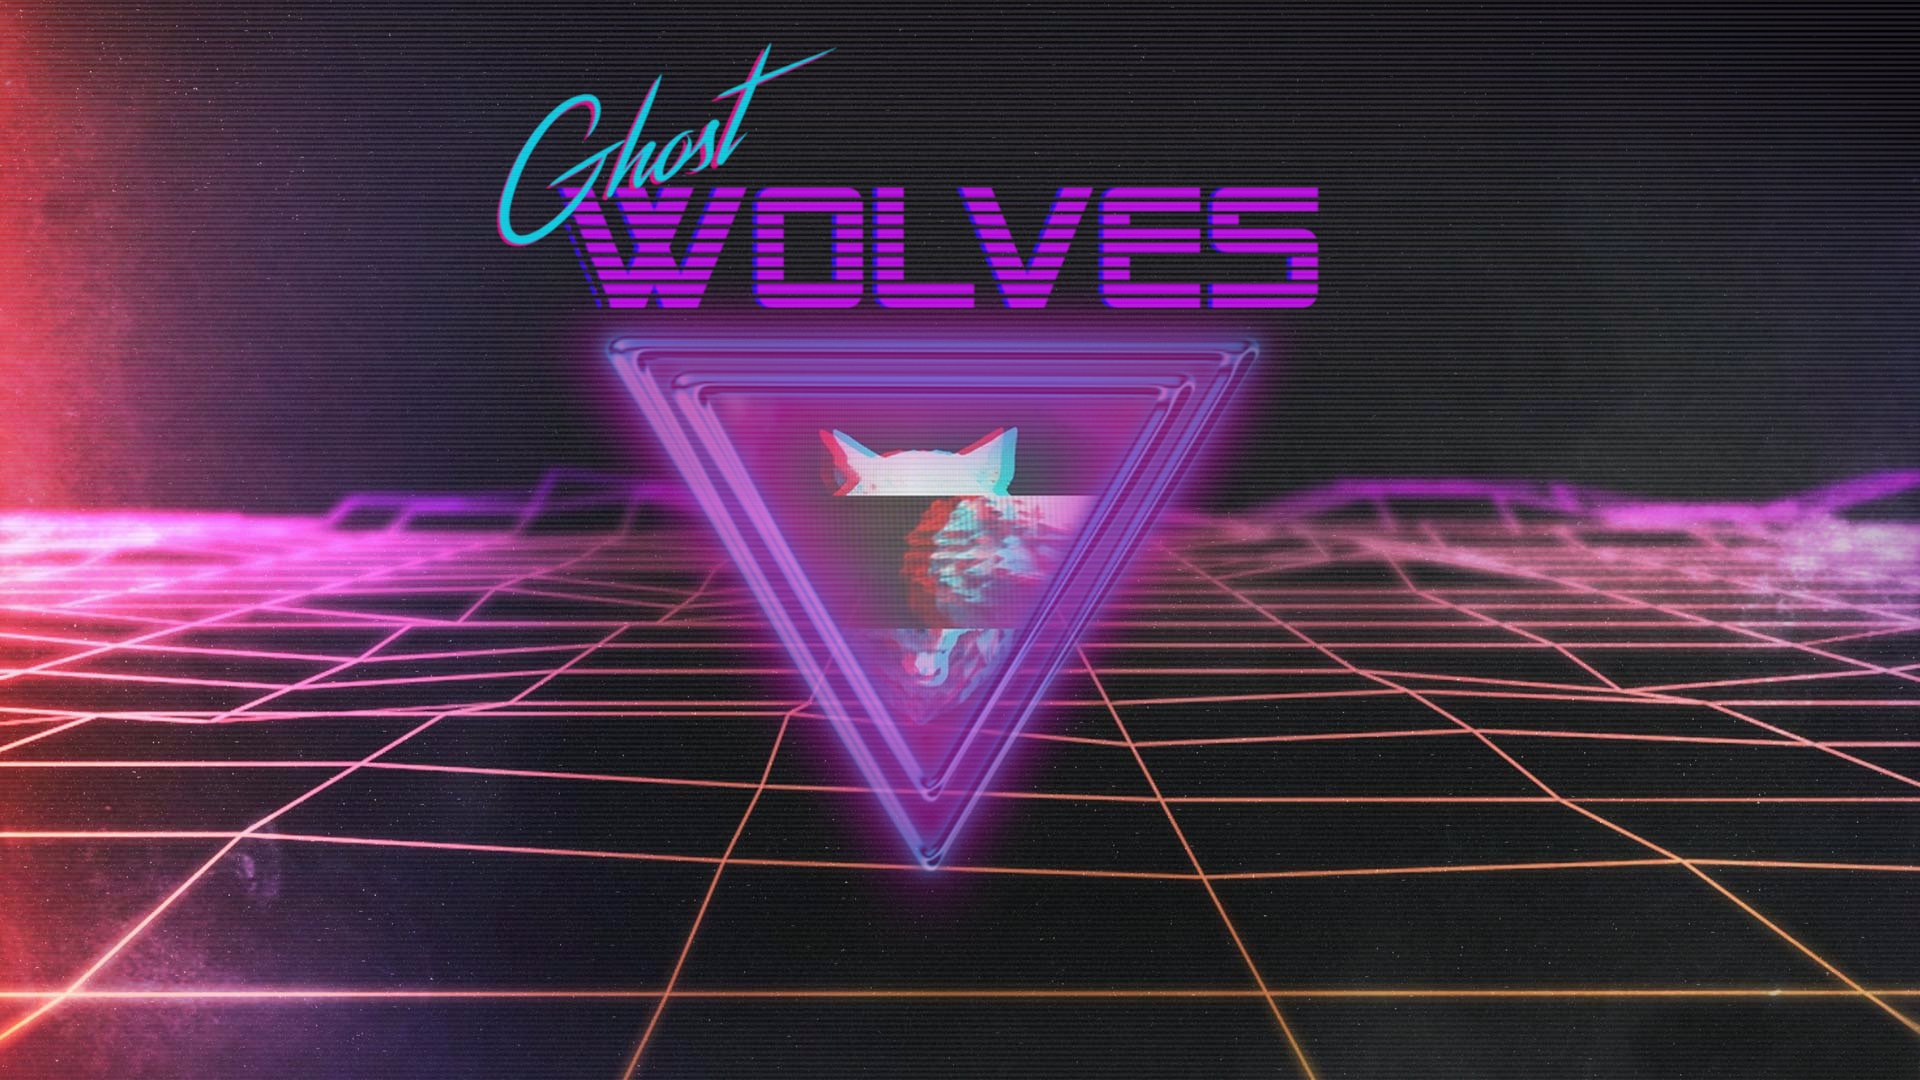 1980s, Synthwave, Wolf, Triangle, Grid, Retro style, Neon, Hotline